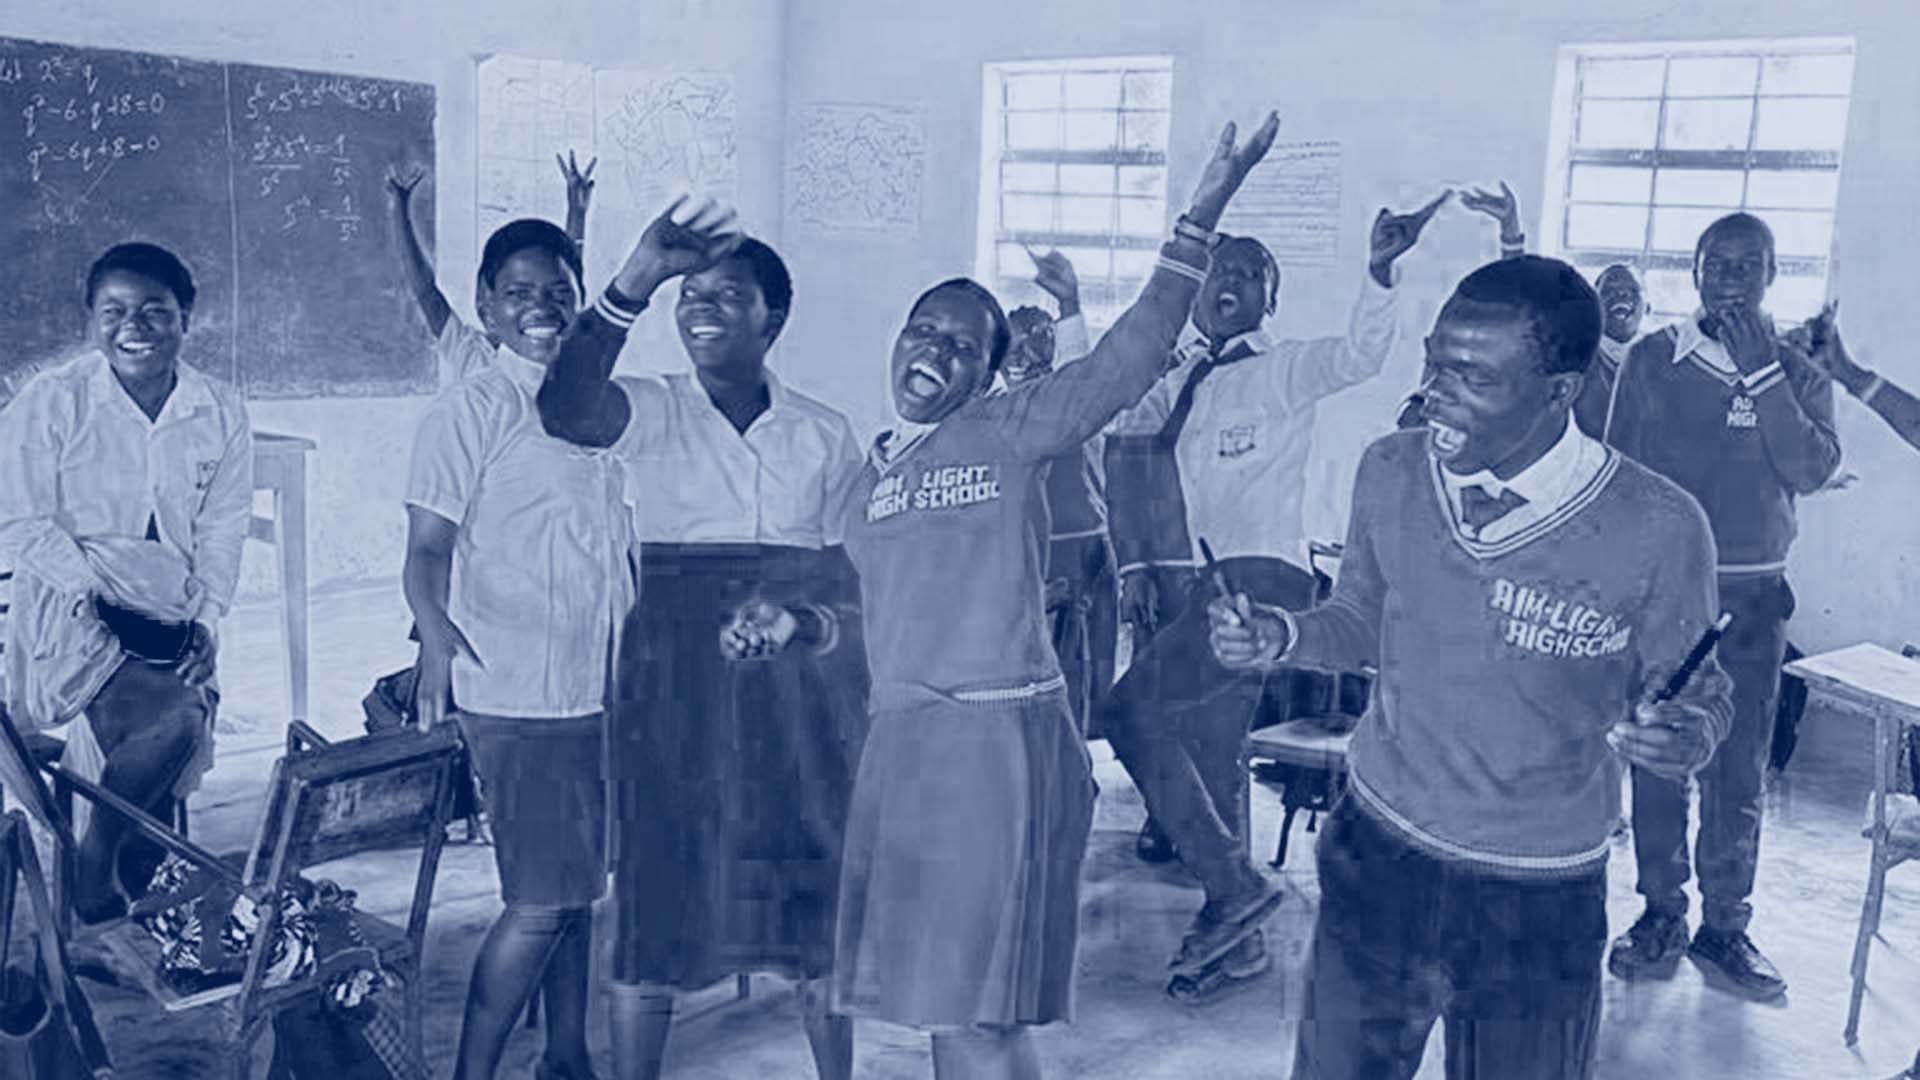 high-school students celebrating/dancing in a classroom